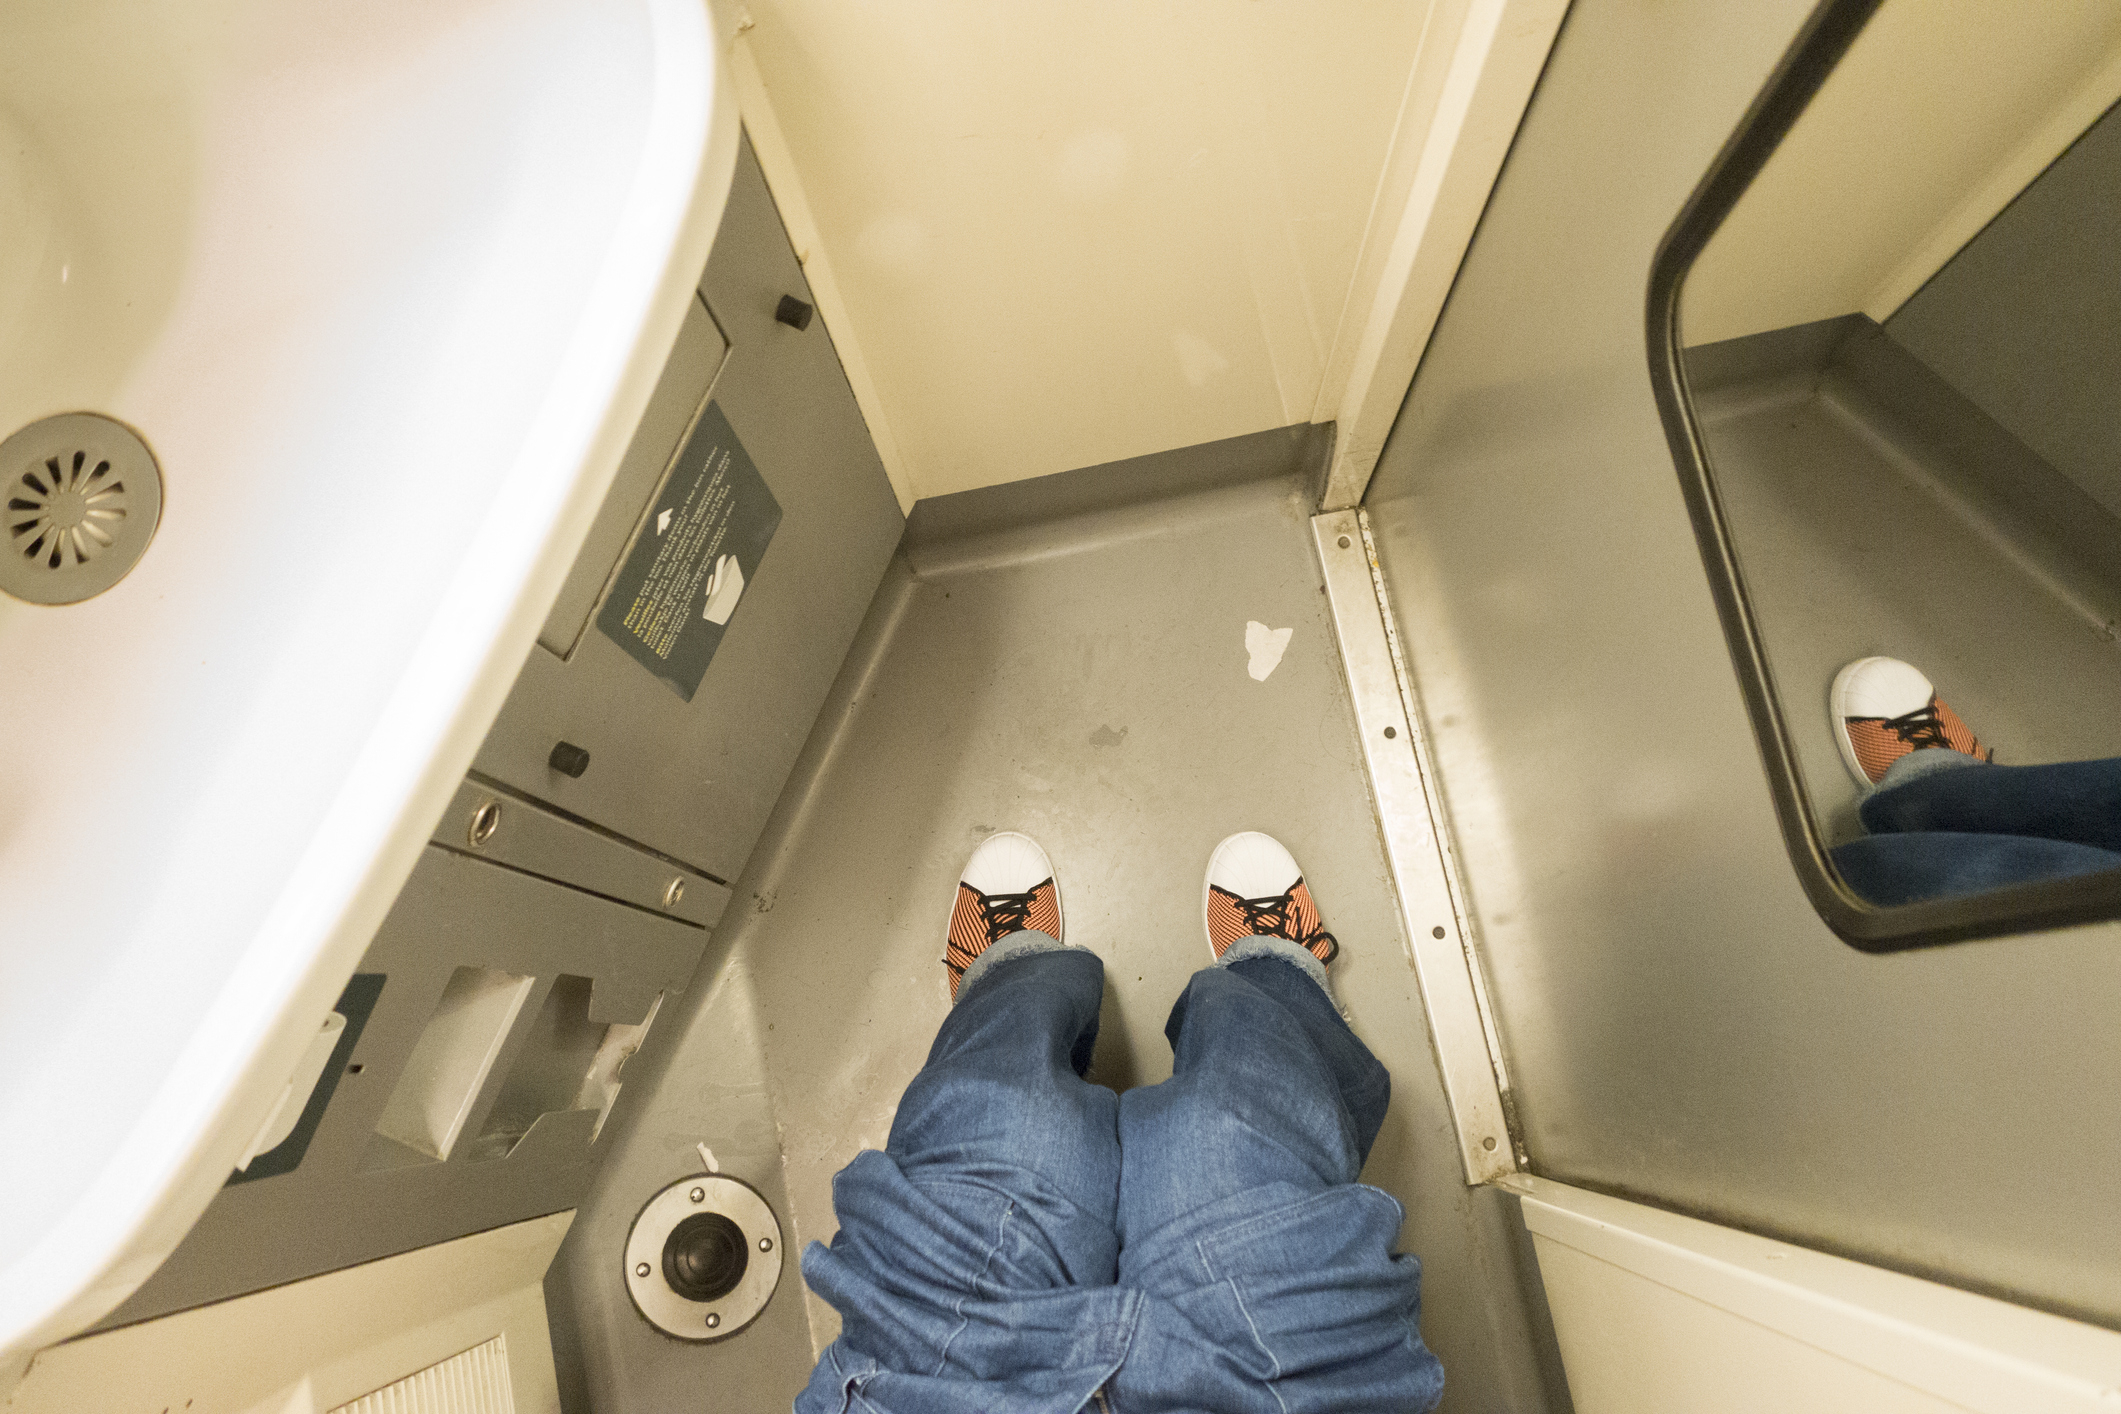 Person&#x27;s feet in sneakers standing inside an airplane lavatory